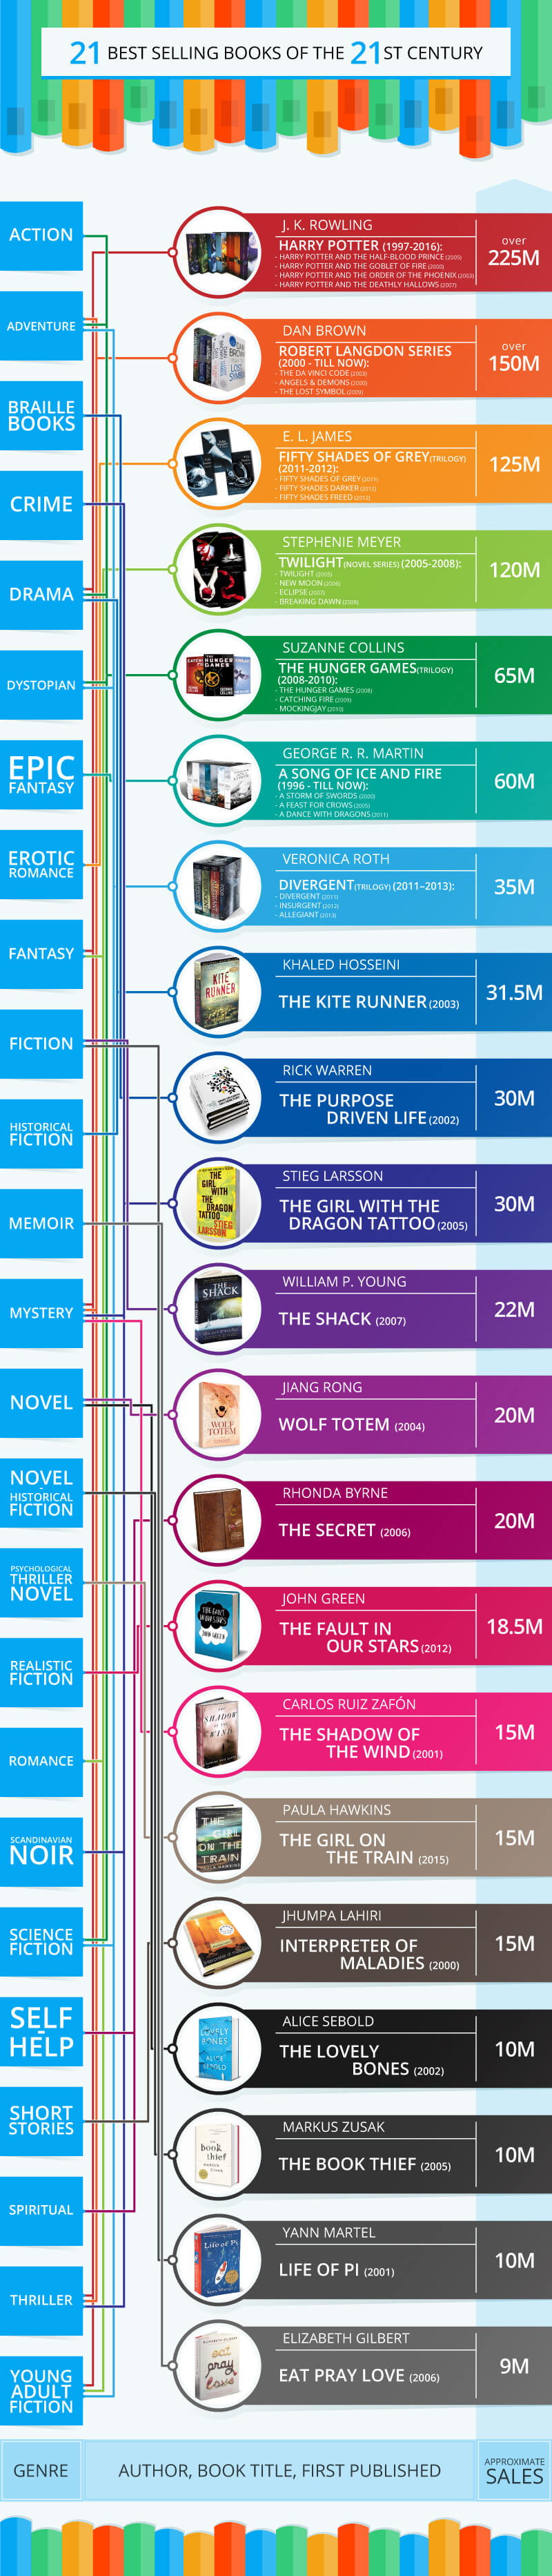 Best Selling Books of the 21st Century (as of 2017)